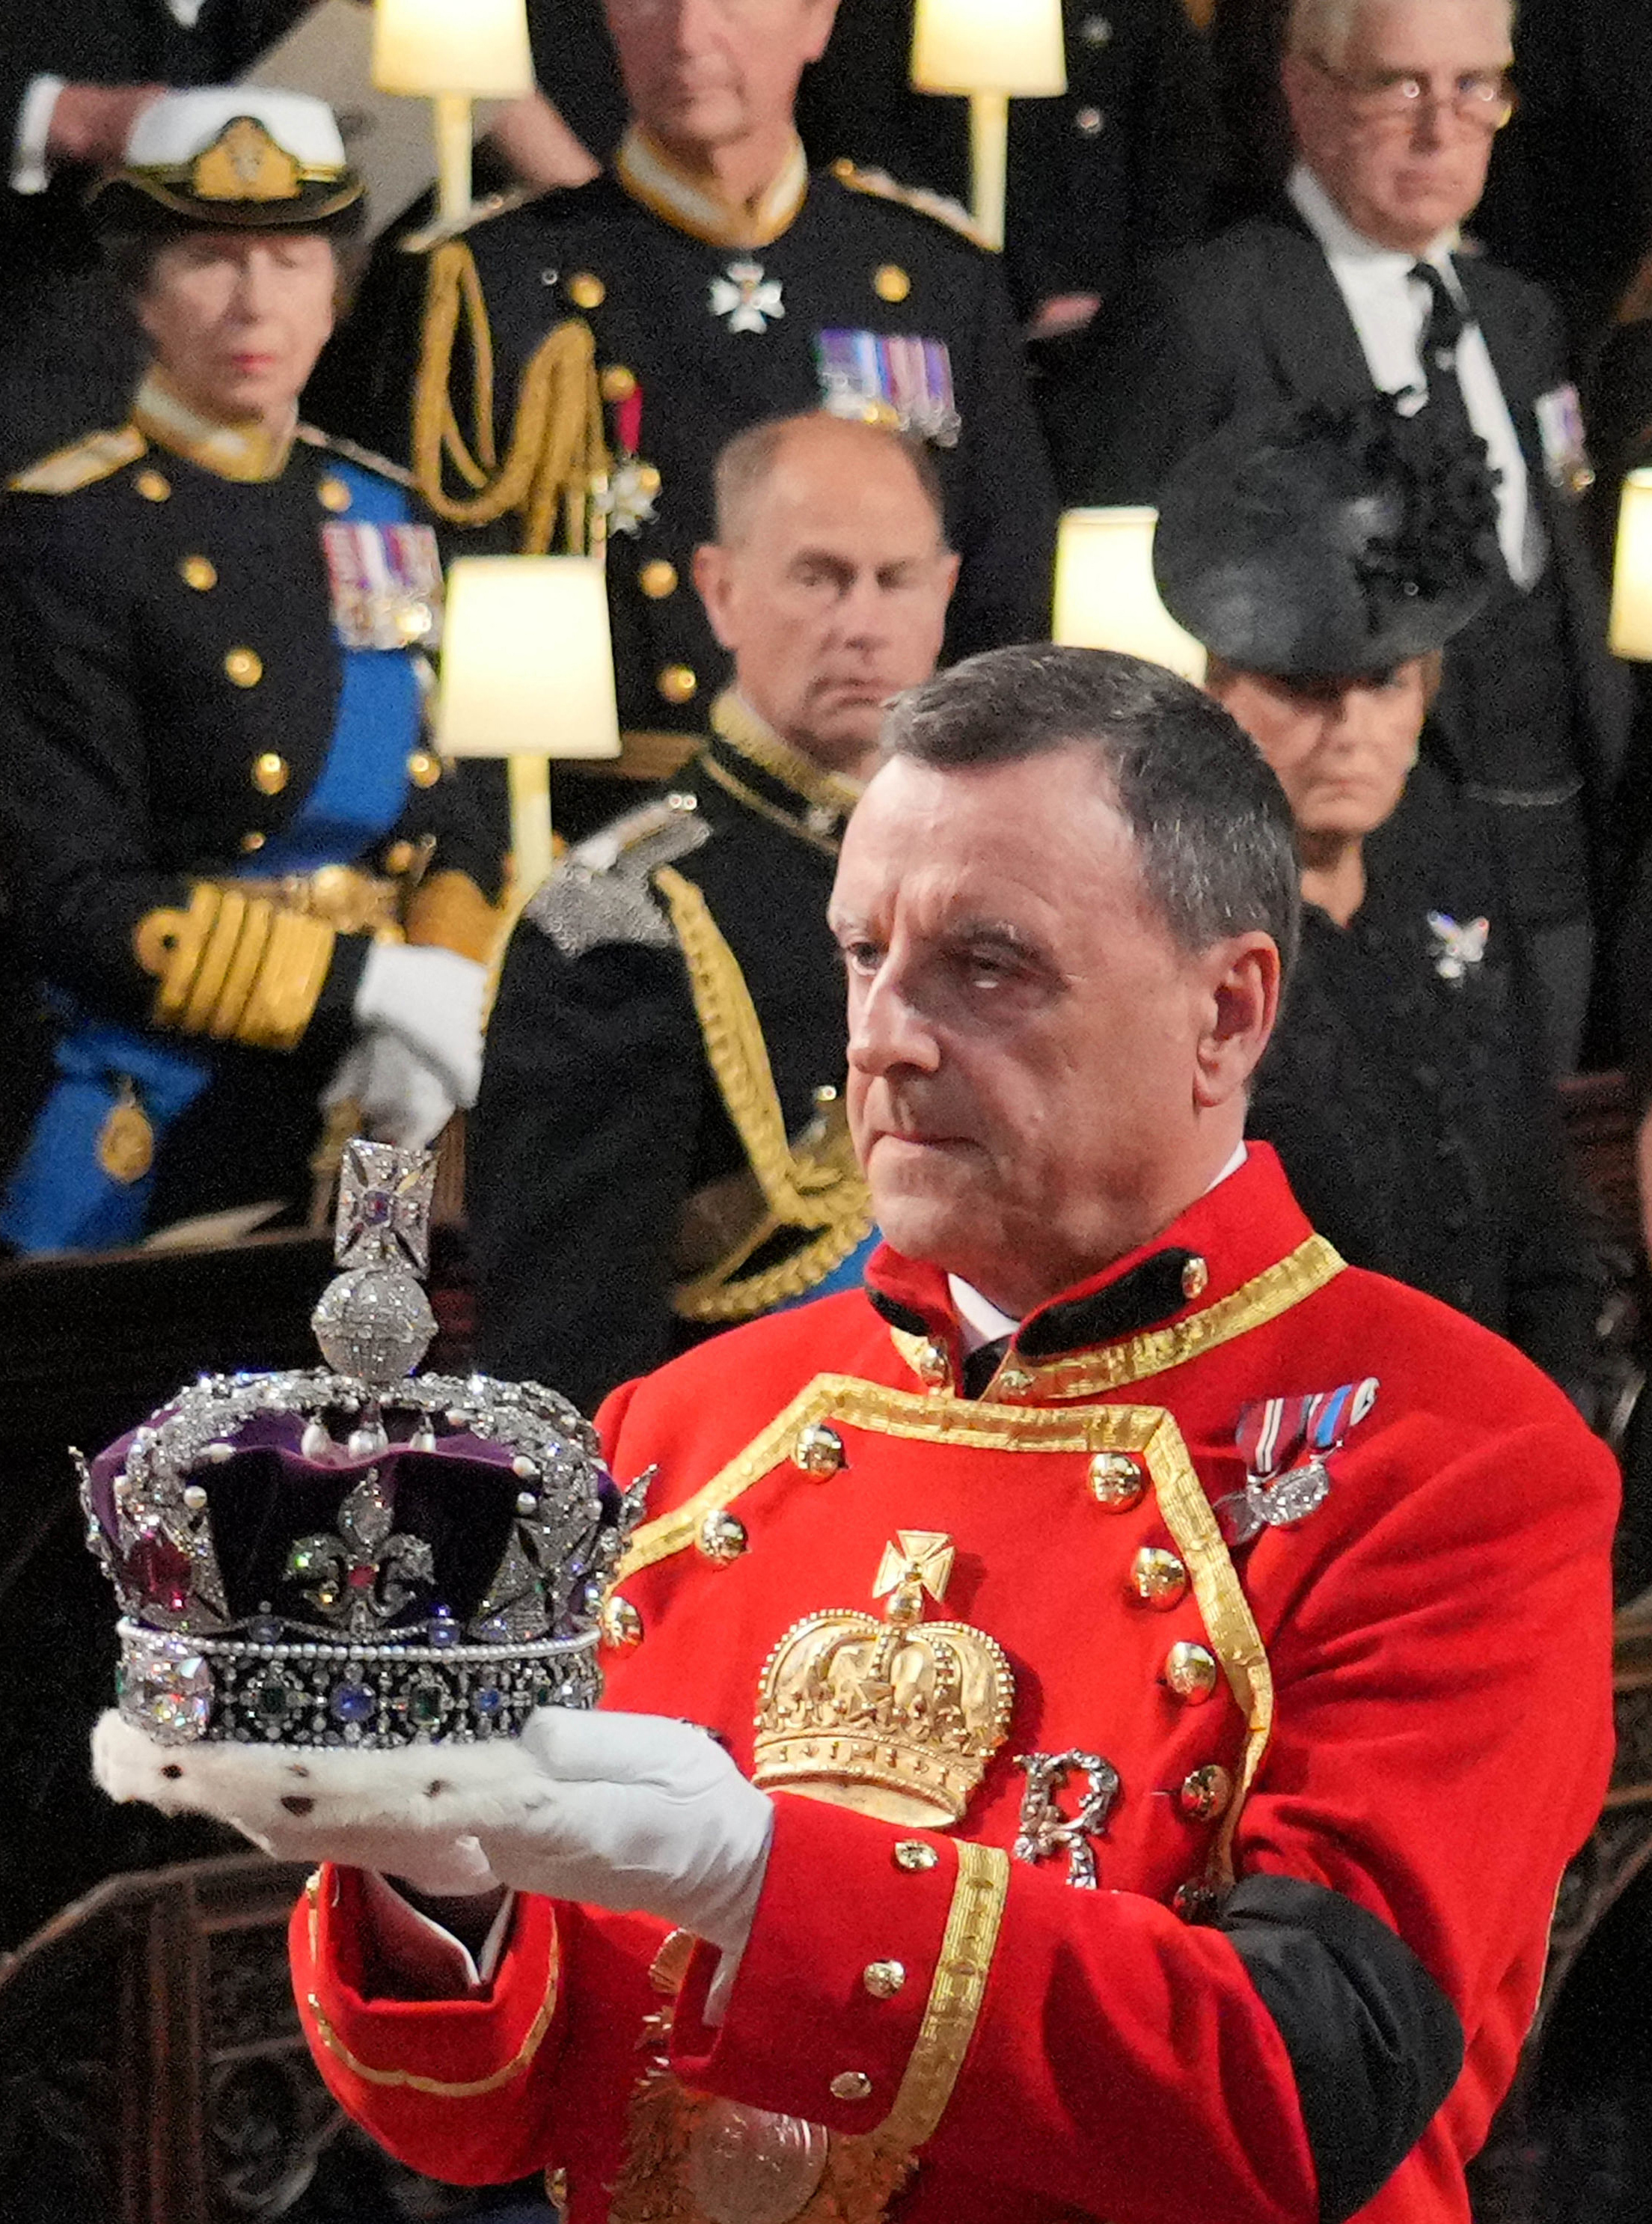 The coffin of Queen Elizabeth II, adorned with a Royal Standard and the Imperial State Crown is pictured during a procession from Buckingham Palace to the Palace of Westminster, in London on September 14, 2022. Queen Elizabeth II will lie in state in Westminster Hall inside the Palace of Westminster, from Wednesday until a few hours before her funeral on Monday, with huge queues expected to file past her coffin to pay their respects.MARKO DJURICA / POOL / AFP